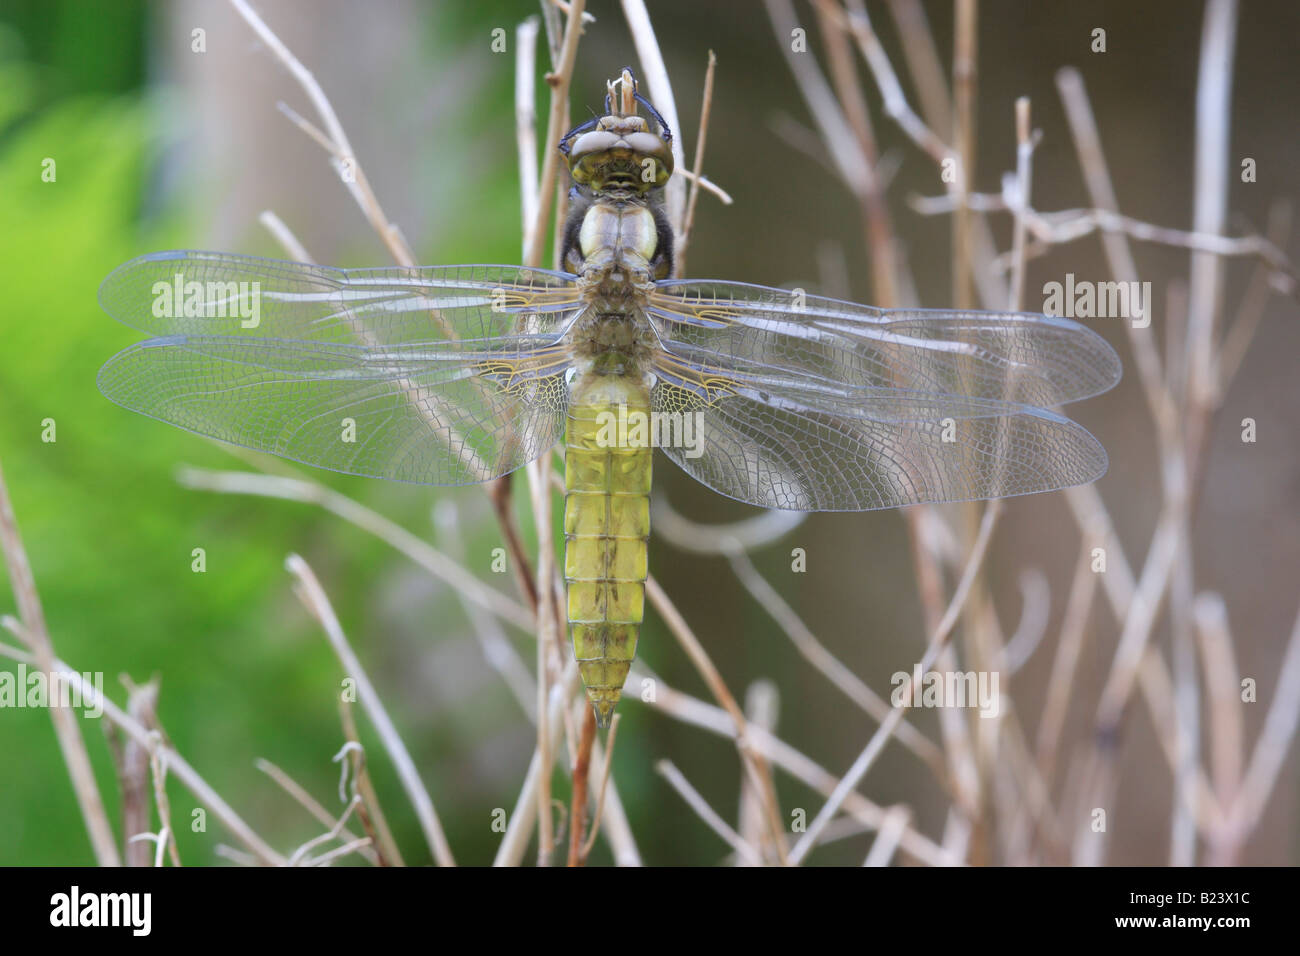 Broad-Bodied Chaser Dragonfly, Teneral Phase (Immature Adult). Lubellula depressa. Stock Photo